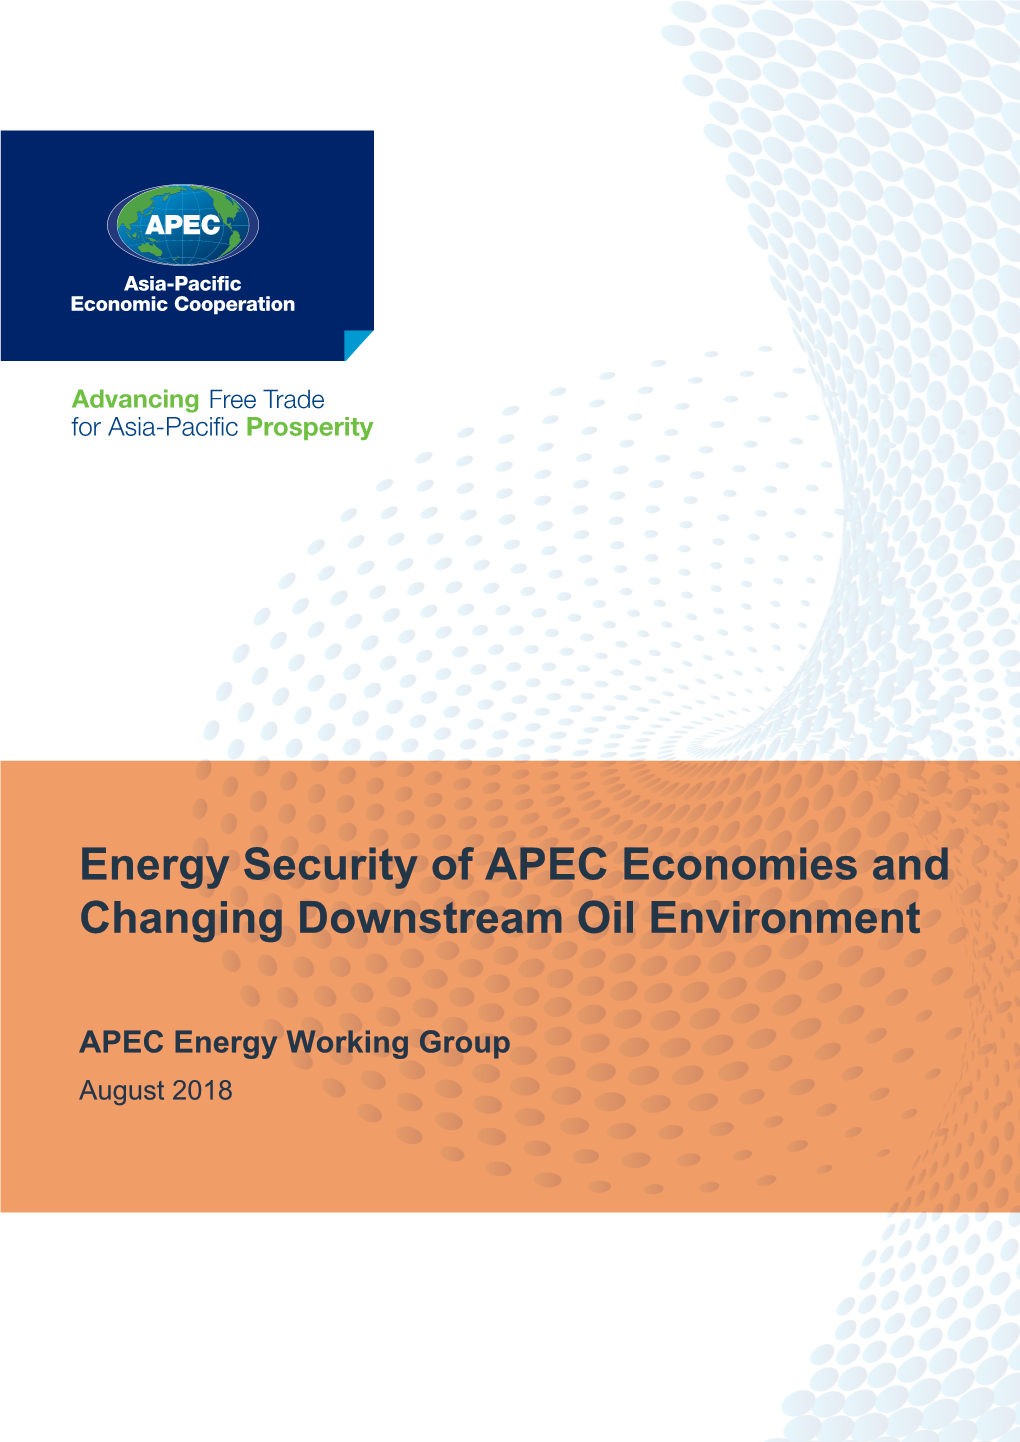 Energy Security of APEC Economies and Changing Downstream Oil Environment